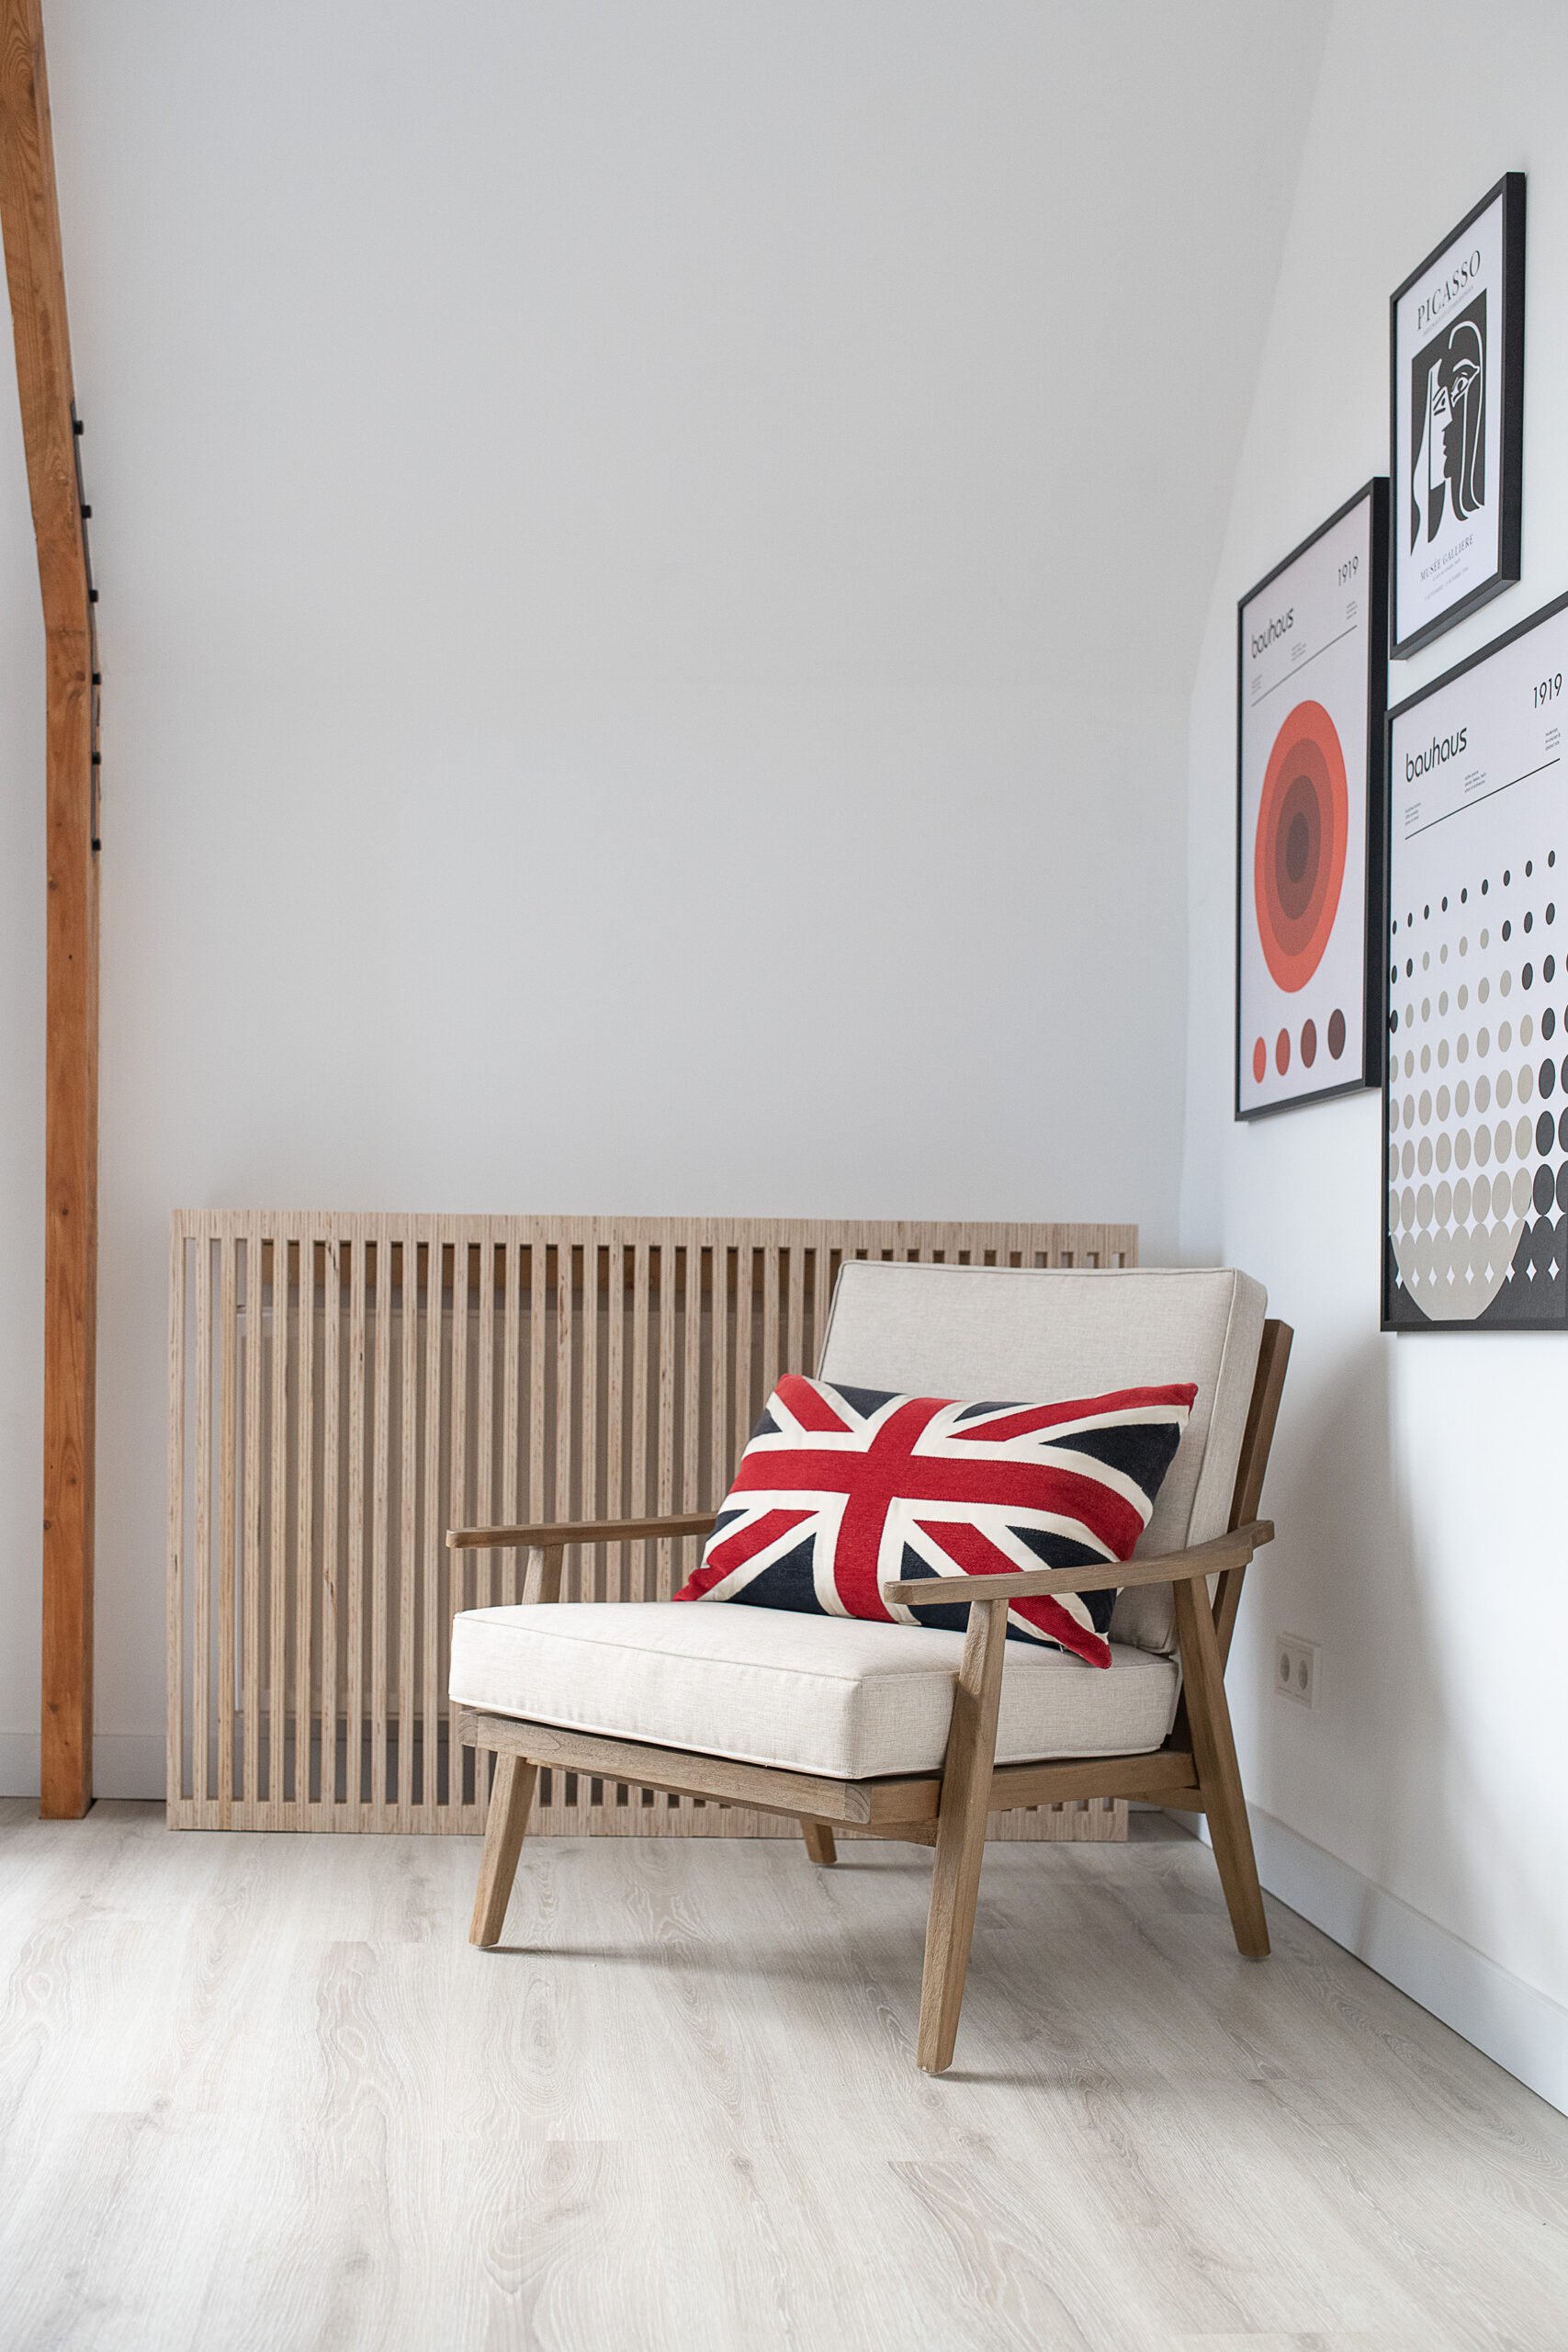 How To Build A Slatted Radiator Cover